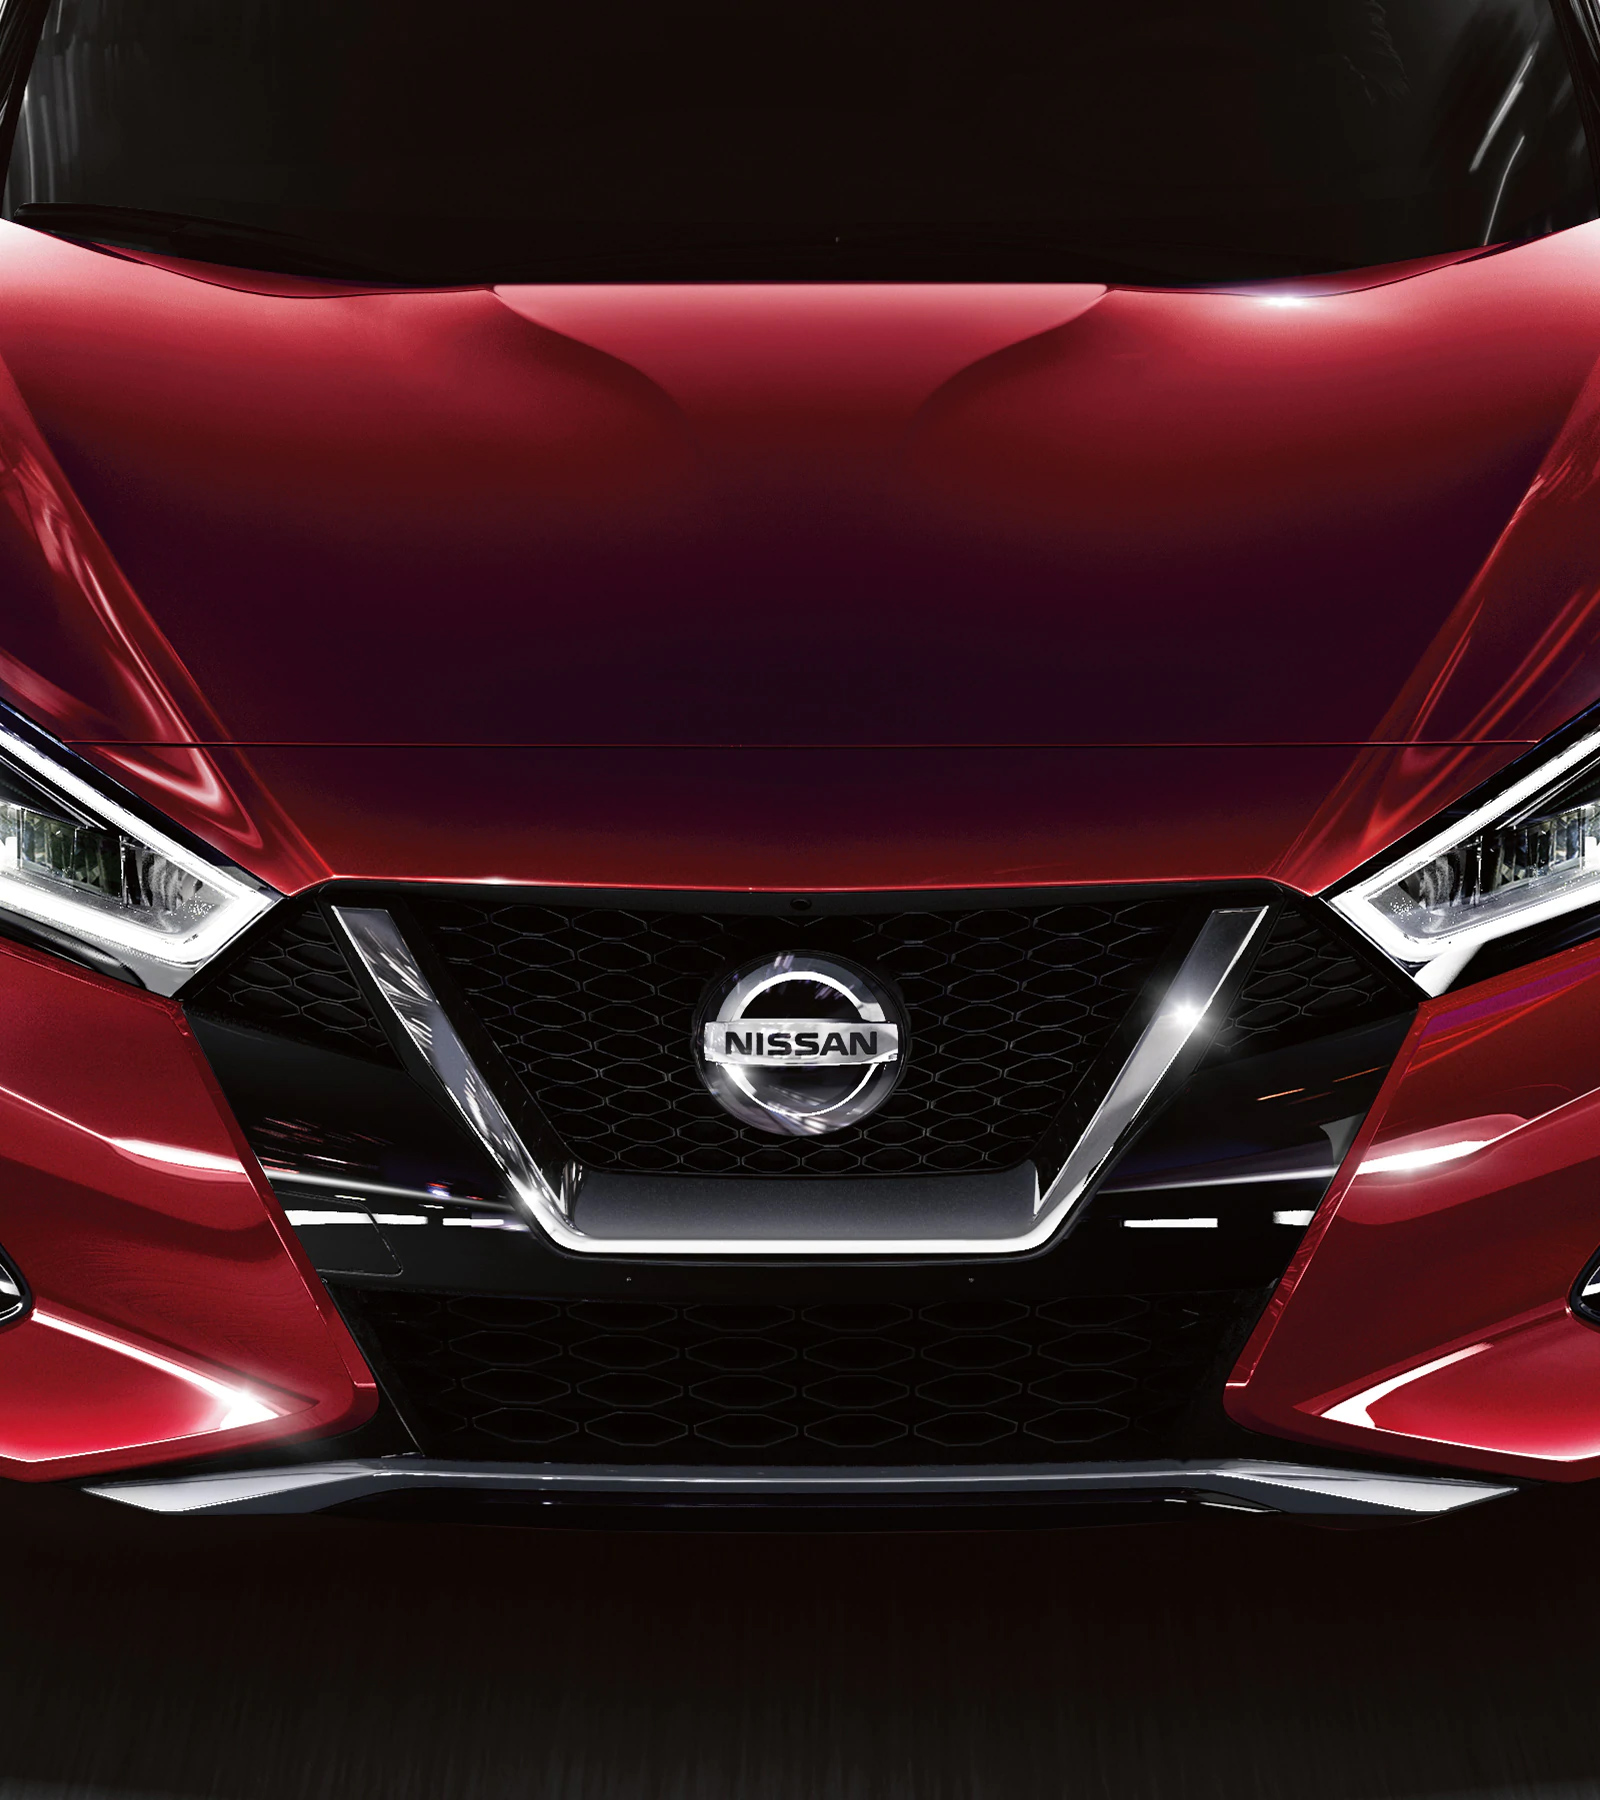 Nissan Maxima exterior finish in red